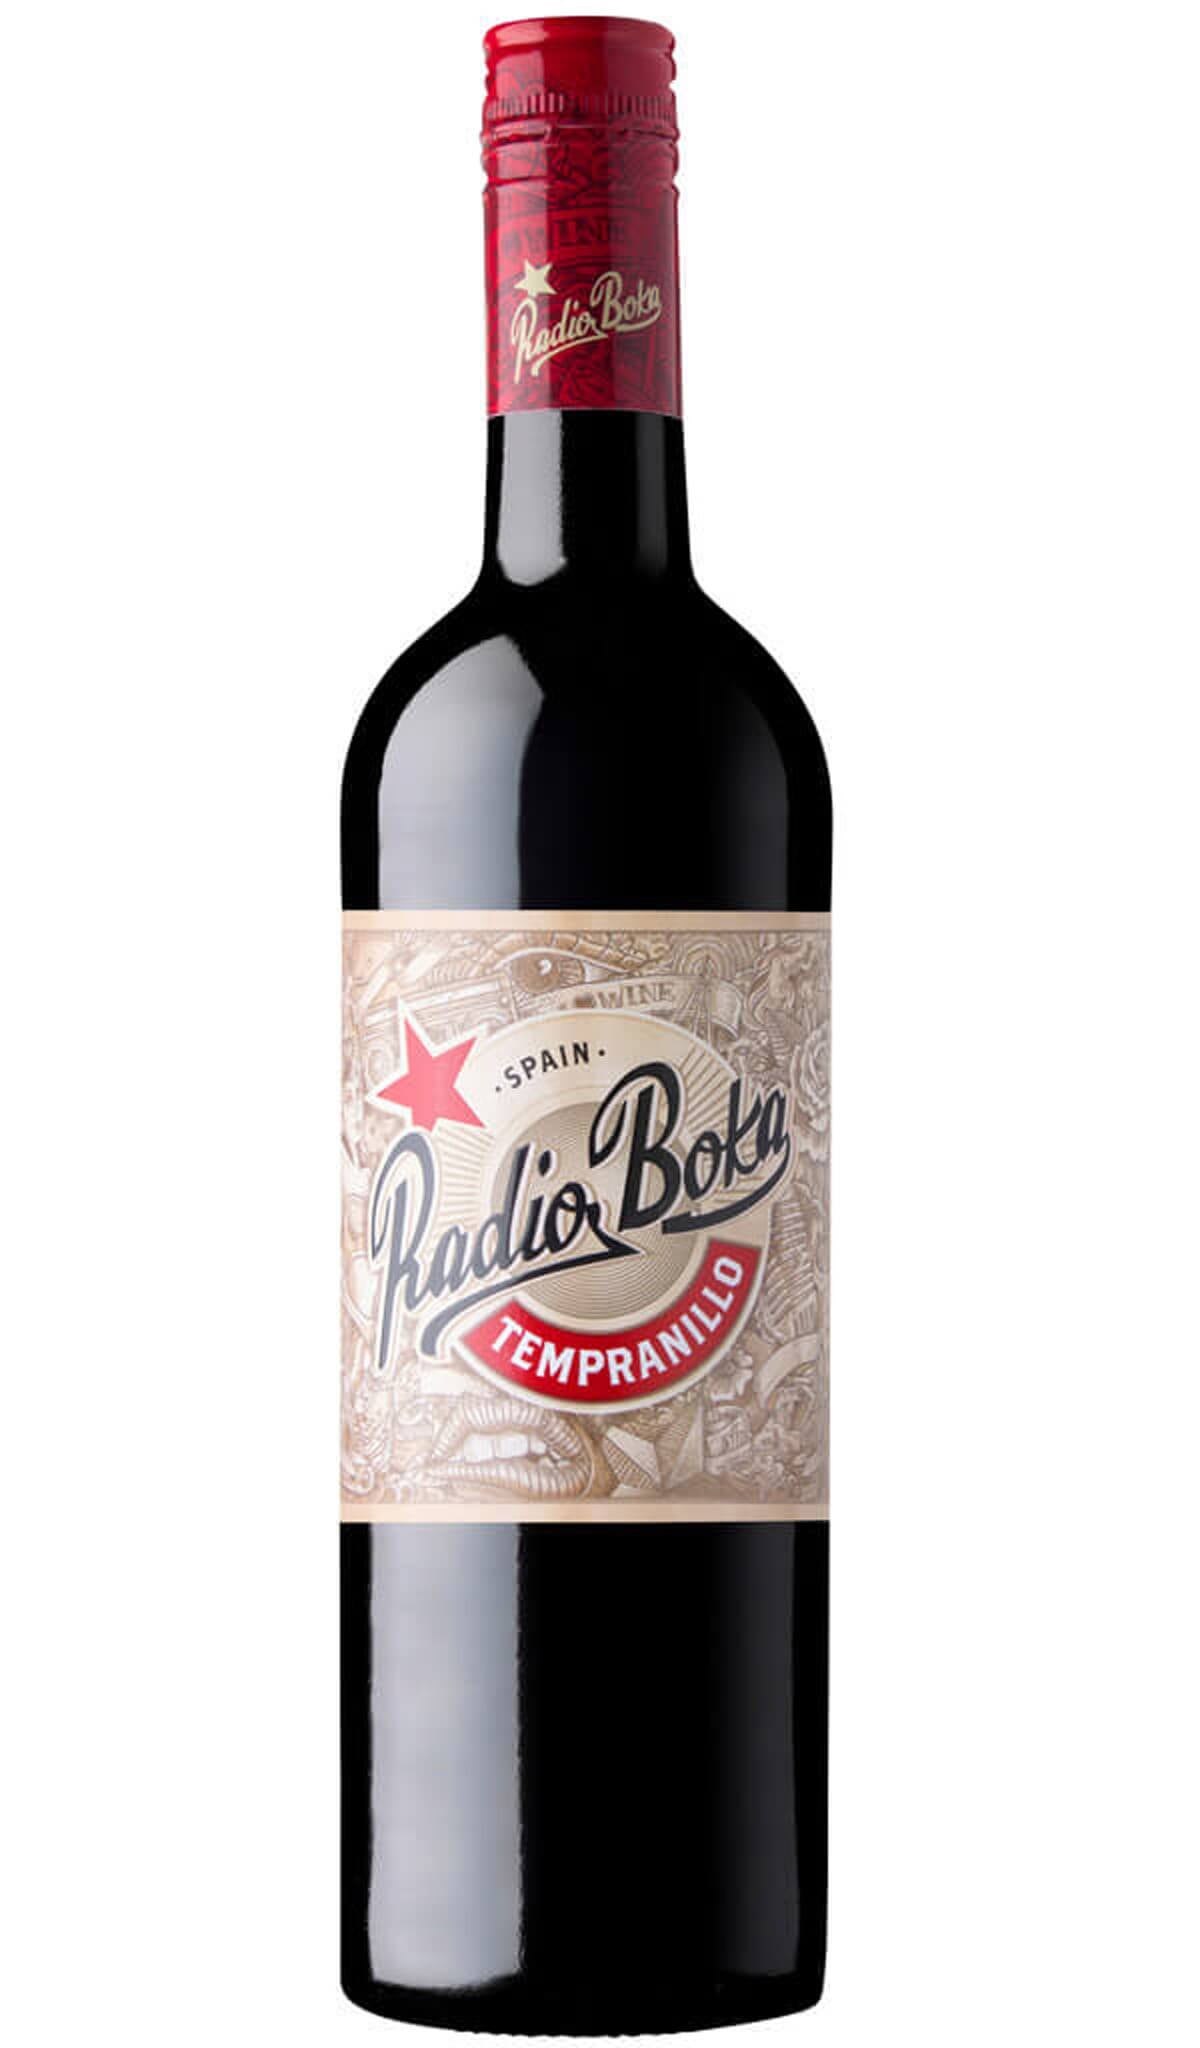 Find out more or buy Radio Boka Tempranillo 2022 (Spain) online at Wine Sellers Direct - Australia’s independent liquor specialists.